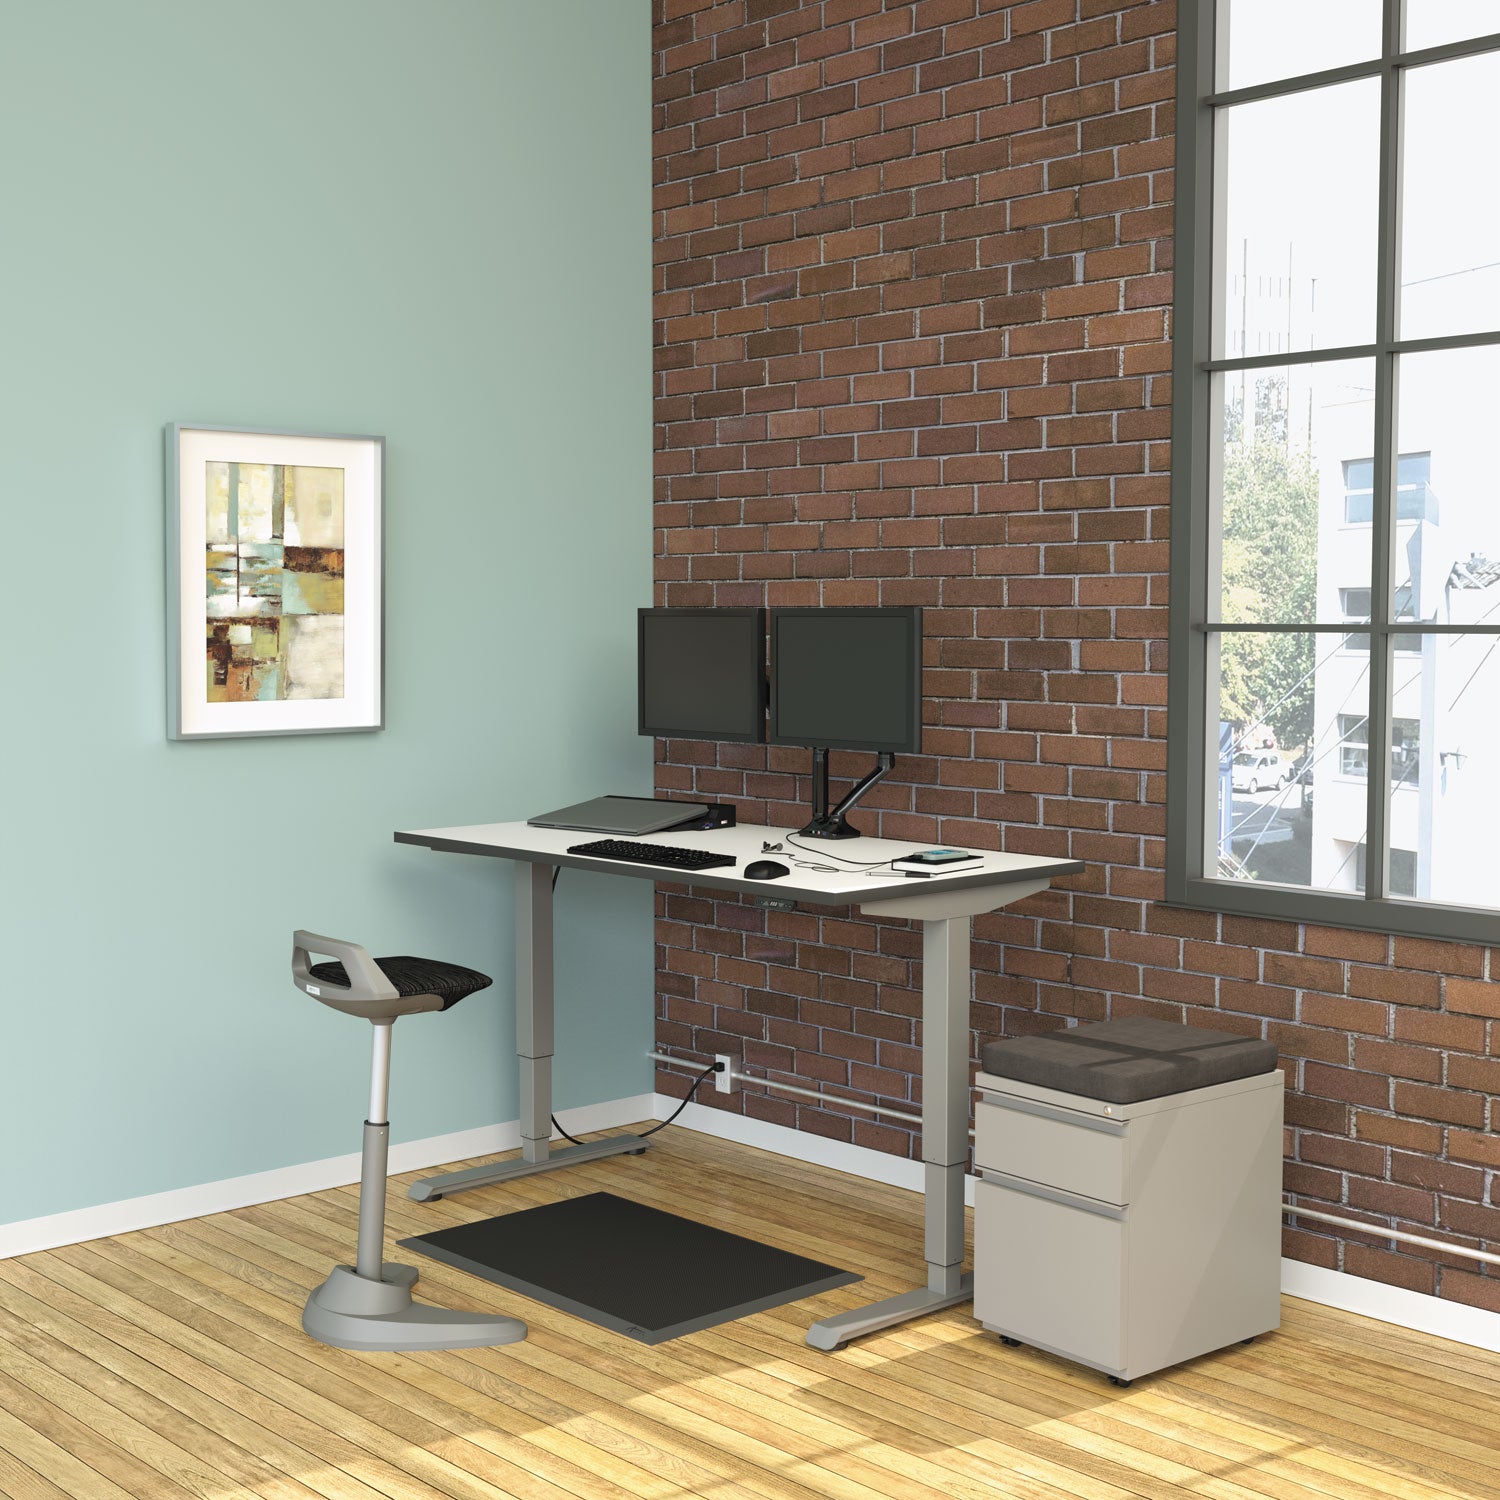 adaptivergo-sit-stand-3-stage-electric-height-adjustable-table-base-with-memory-control-4806-x-2435-x-25-to-507-gray_aleht3sag - 7